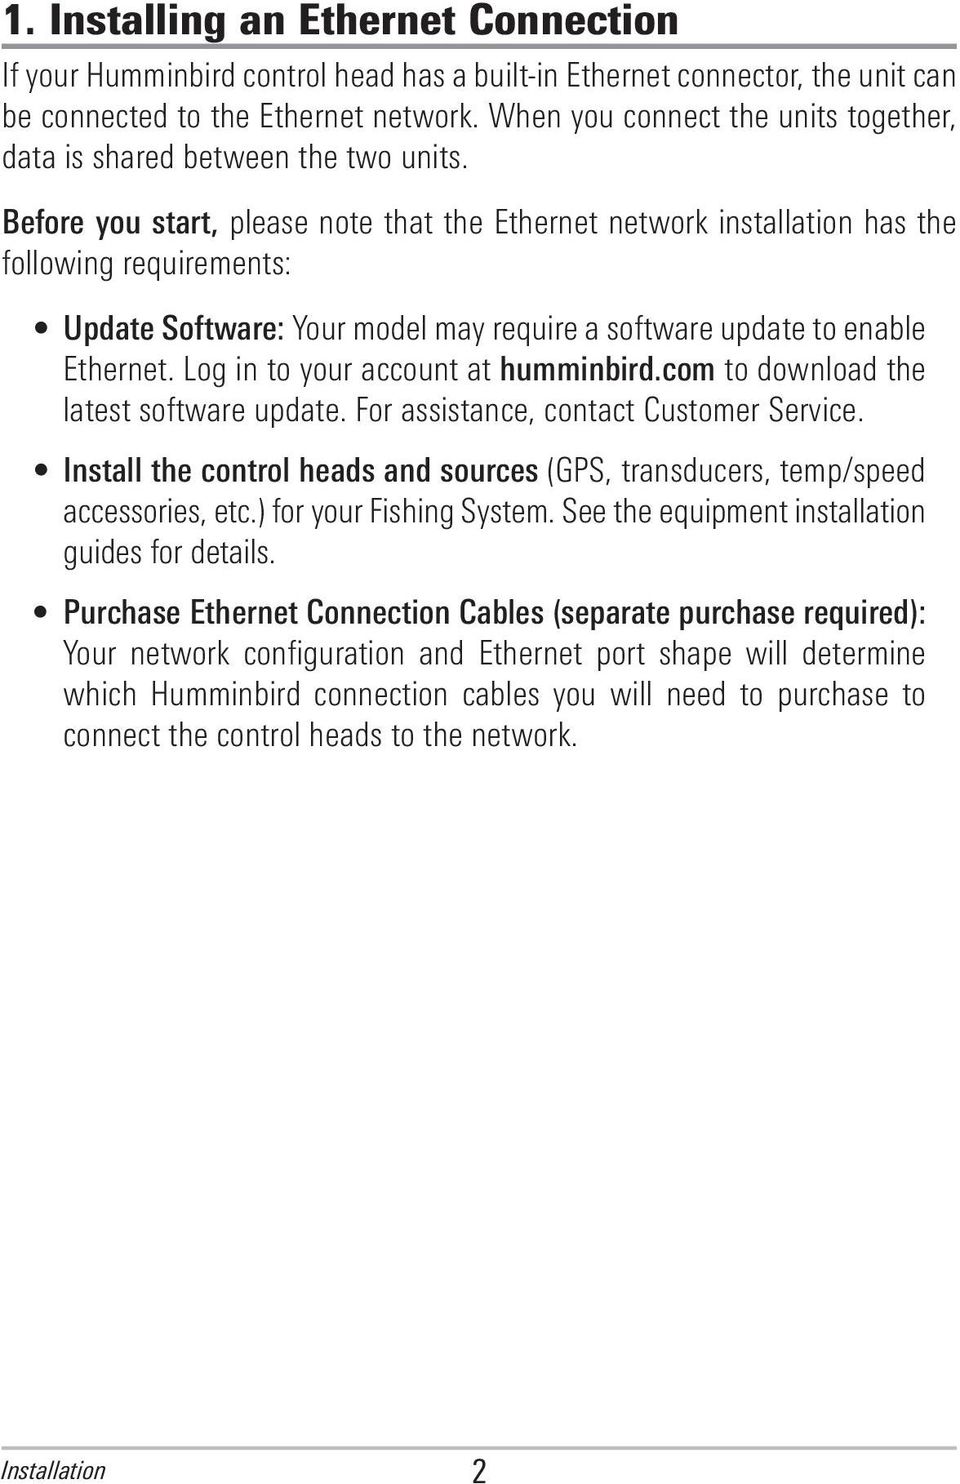 Before you start, please note that the Ethernet network installation has the following requirements: Update Software: Your model may require a software update to enable Ethernet.